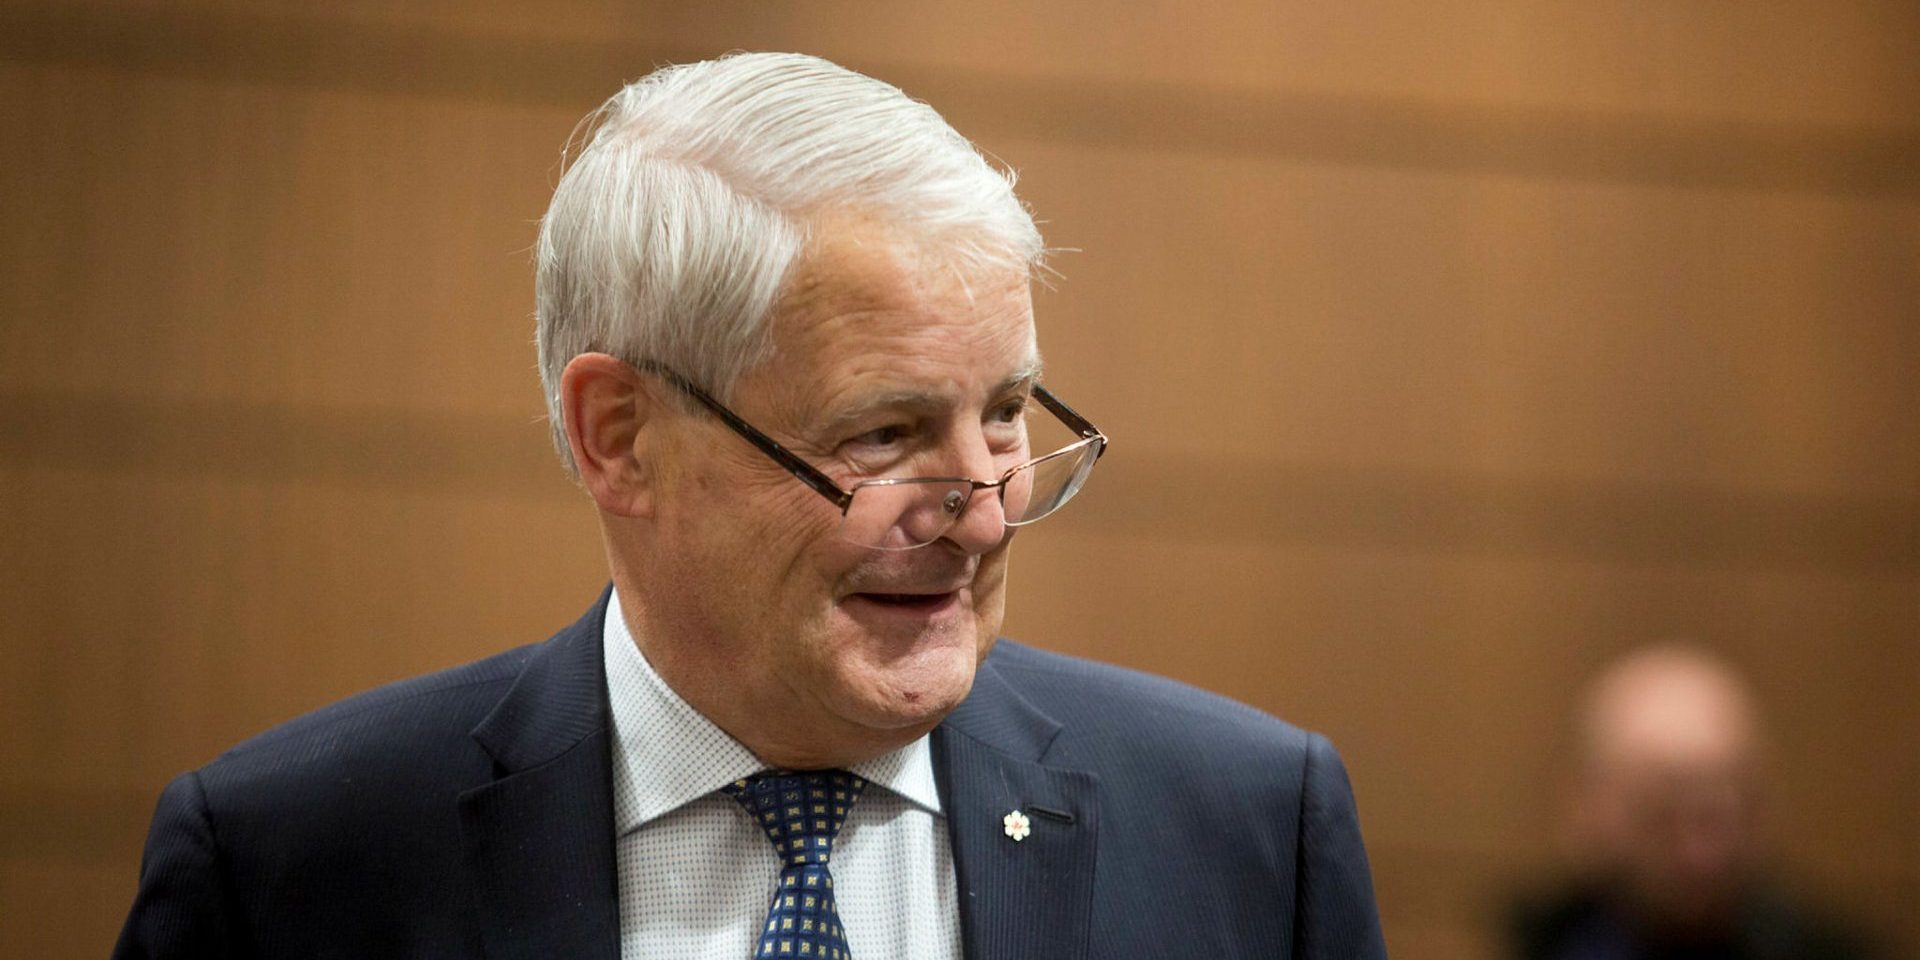 Minister of Transport Marc Garneau appears before the House of Commons Standing Committee on Transport, Infrastructure and Communities  in Ottawa on Feb. 27, 2020.